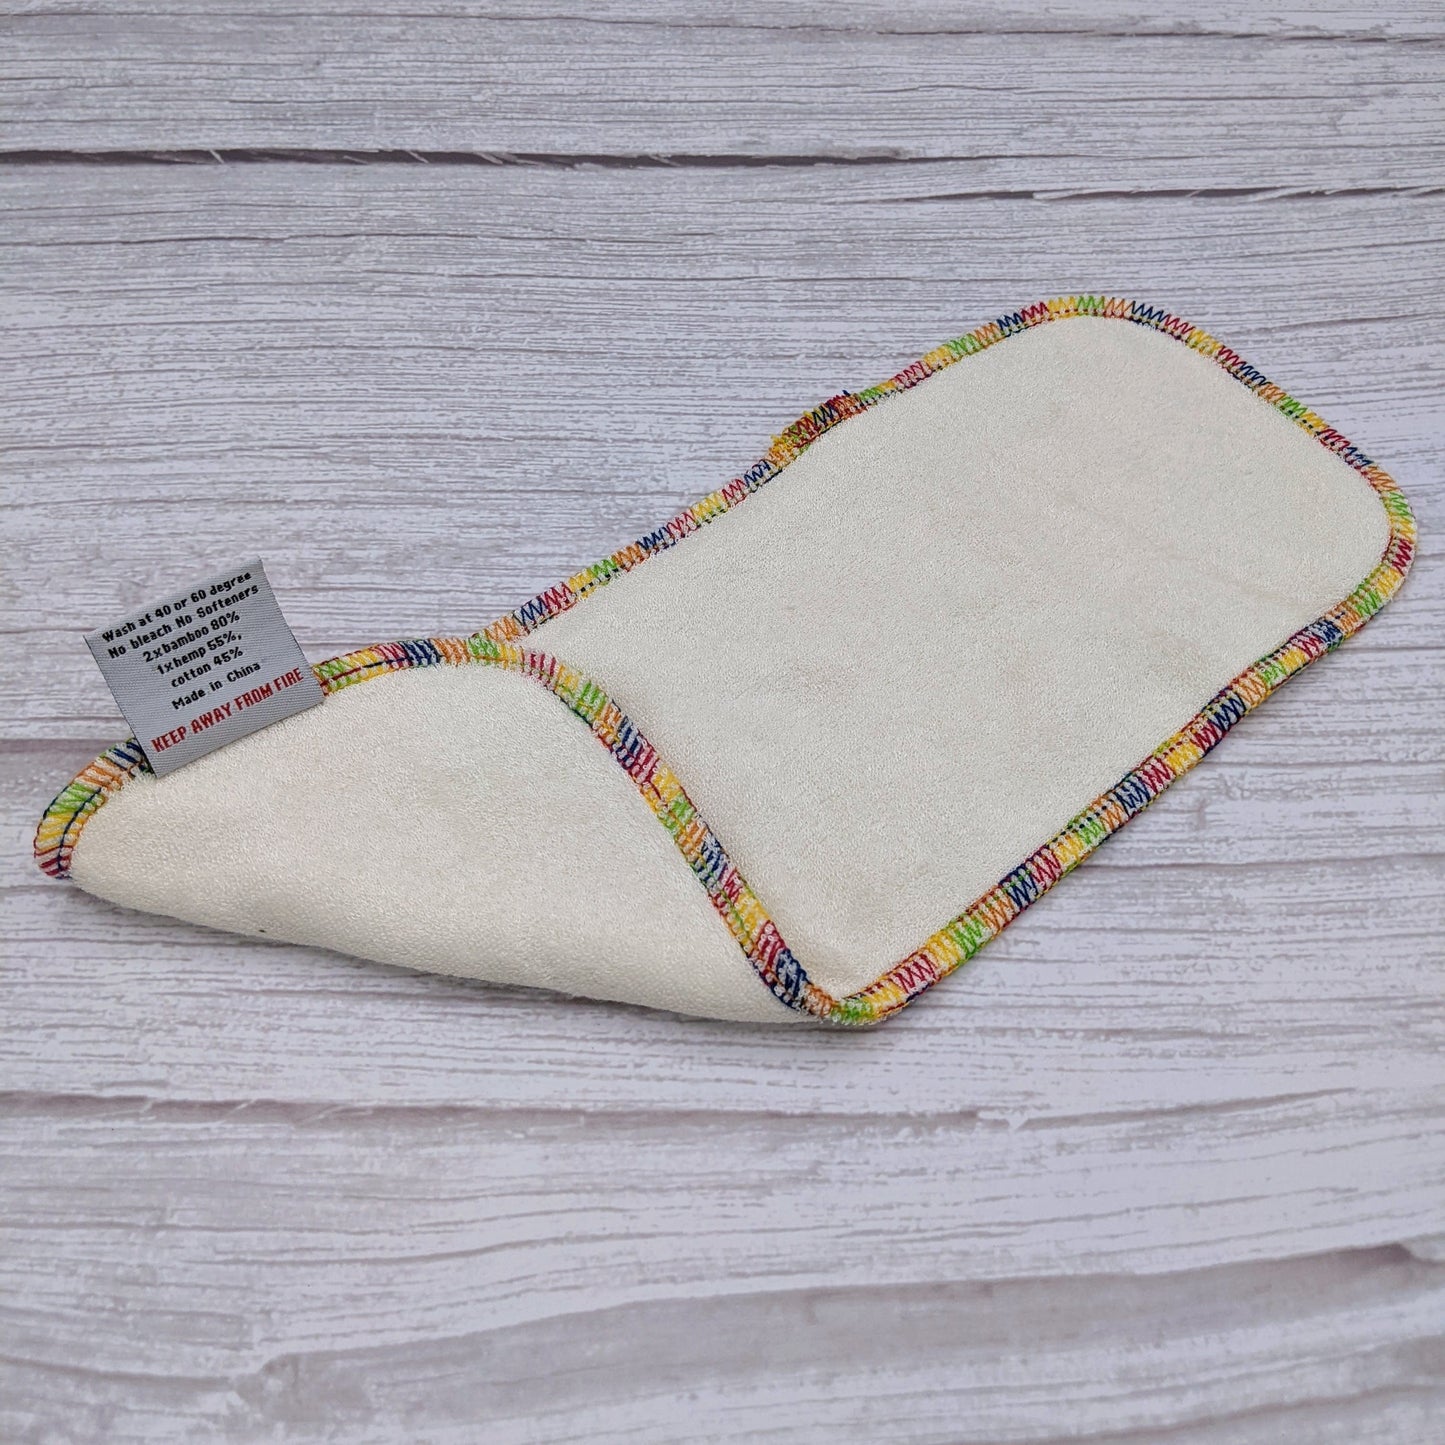 Bamboo and Hemp - Reusable Nappy Booster - Slimline - www.thecotswoldecocompany.co.uk